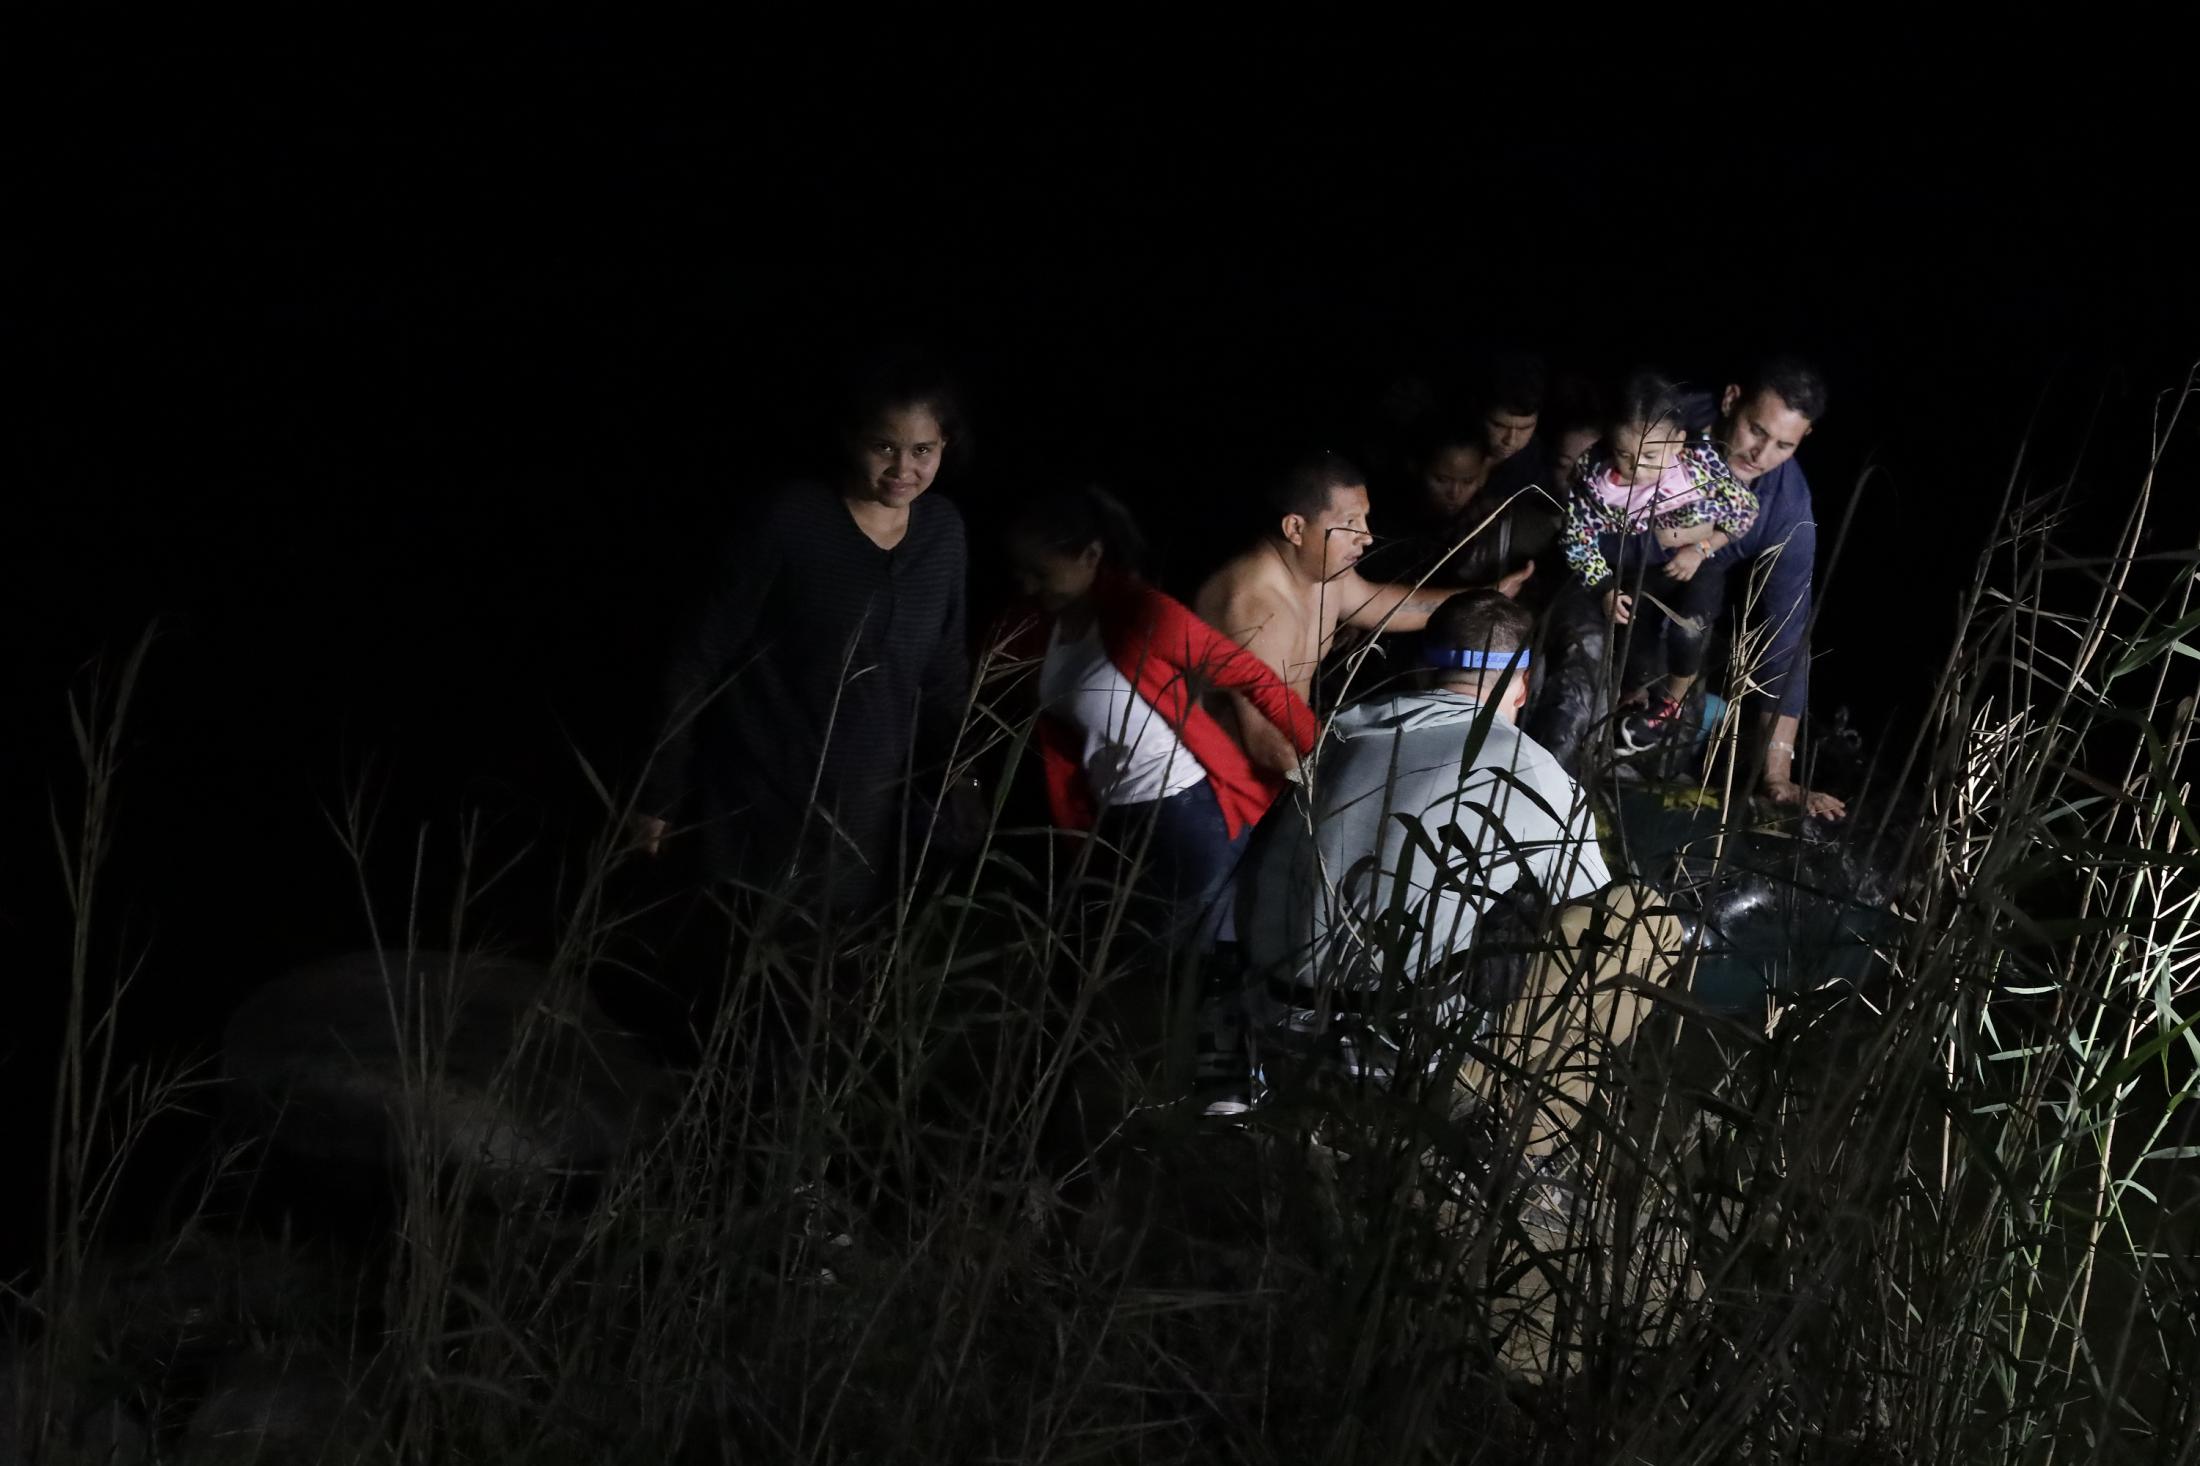 Night on the Rio Grande - During the night on Wednesday 14, 2020, over 200 migrants...